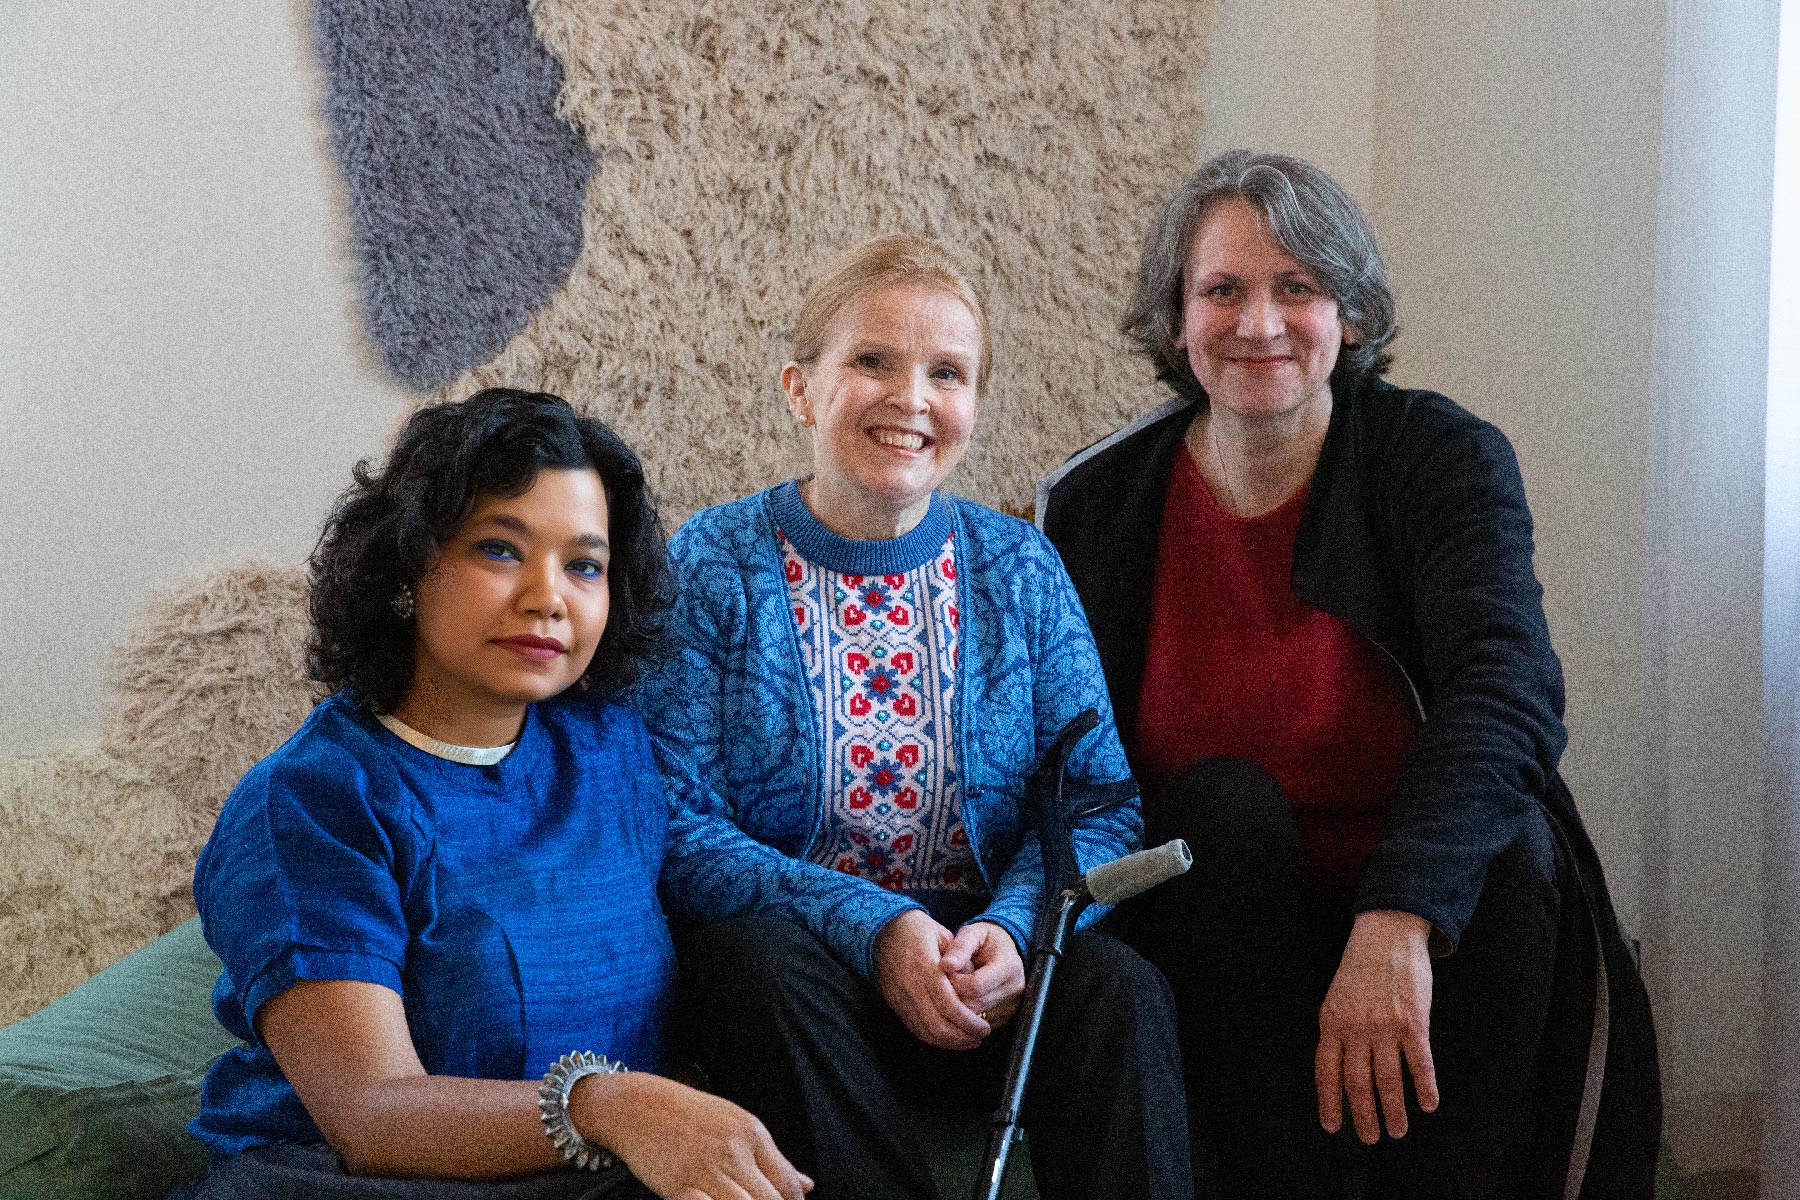 Three artists sitting next to each other and smiling at the camera. On the left is Vidha Saumya, a person with light brown skin and wavy, dark brown hair and a bright blue shirt. In the middle is Jenni-Juulia Wallinheimo-Heimonen, white-skinned with blonde hair, wearing a blue, white and red patterned knitted shirt and a blue cardigan on top. An elbow crutch is resting on her lap. On the right is Pia Lindman, with white skin and grey-brown hair, wearing a red shirt underneath a black cardigan.